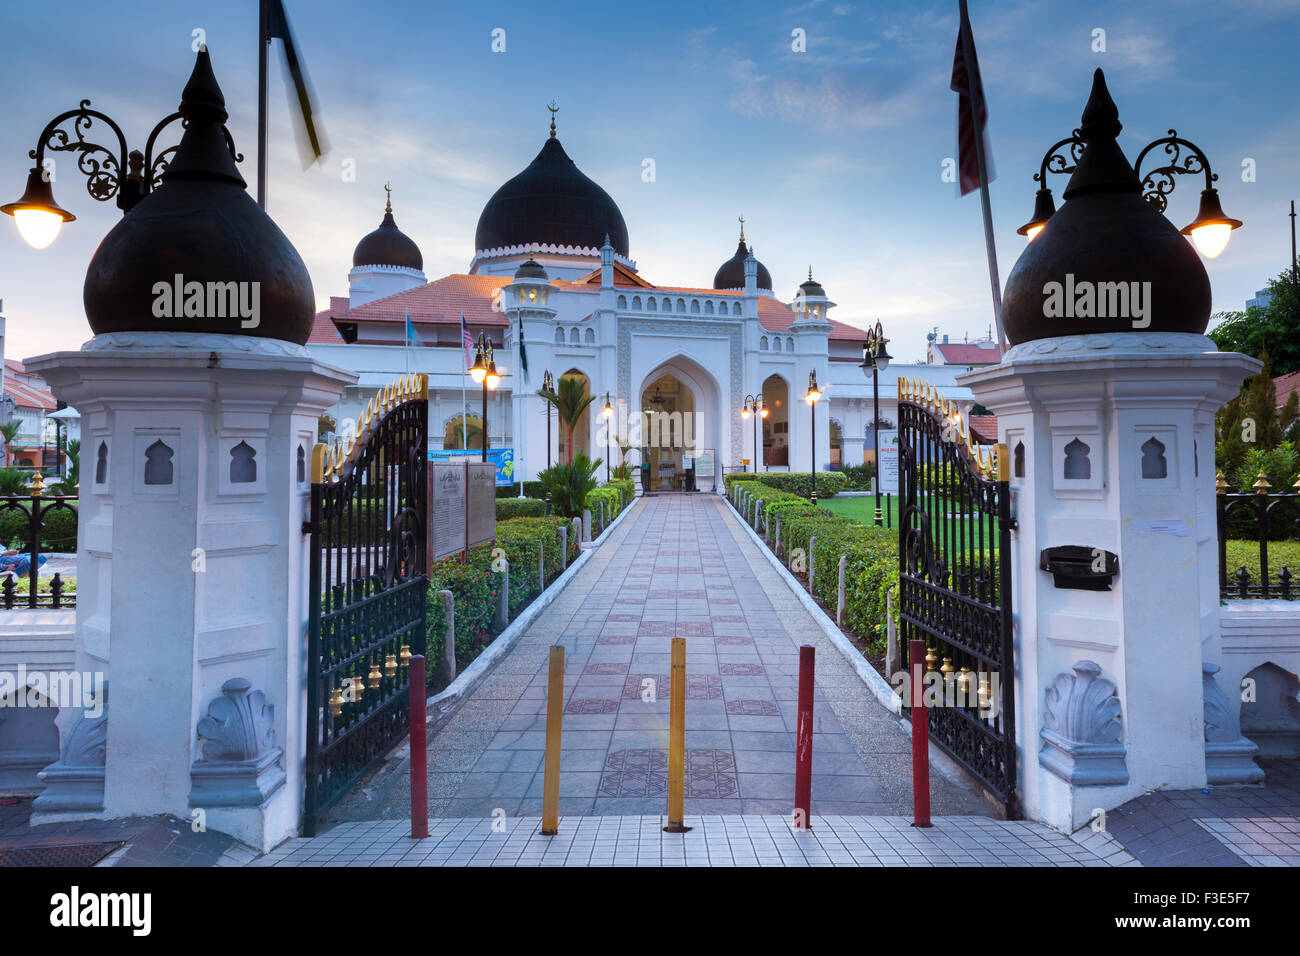 Georgetown, Malaysia — 04 August, 2014: The view of Kapitan Keling Mosque after sunset in Georgetown, Penang, Malaysia on 04 Aug Stock Photo